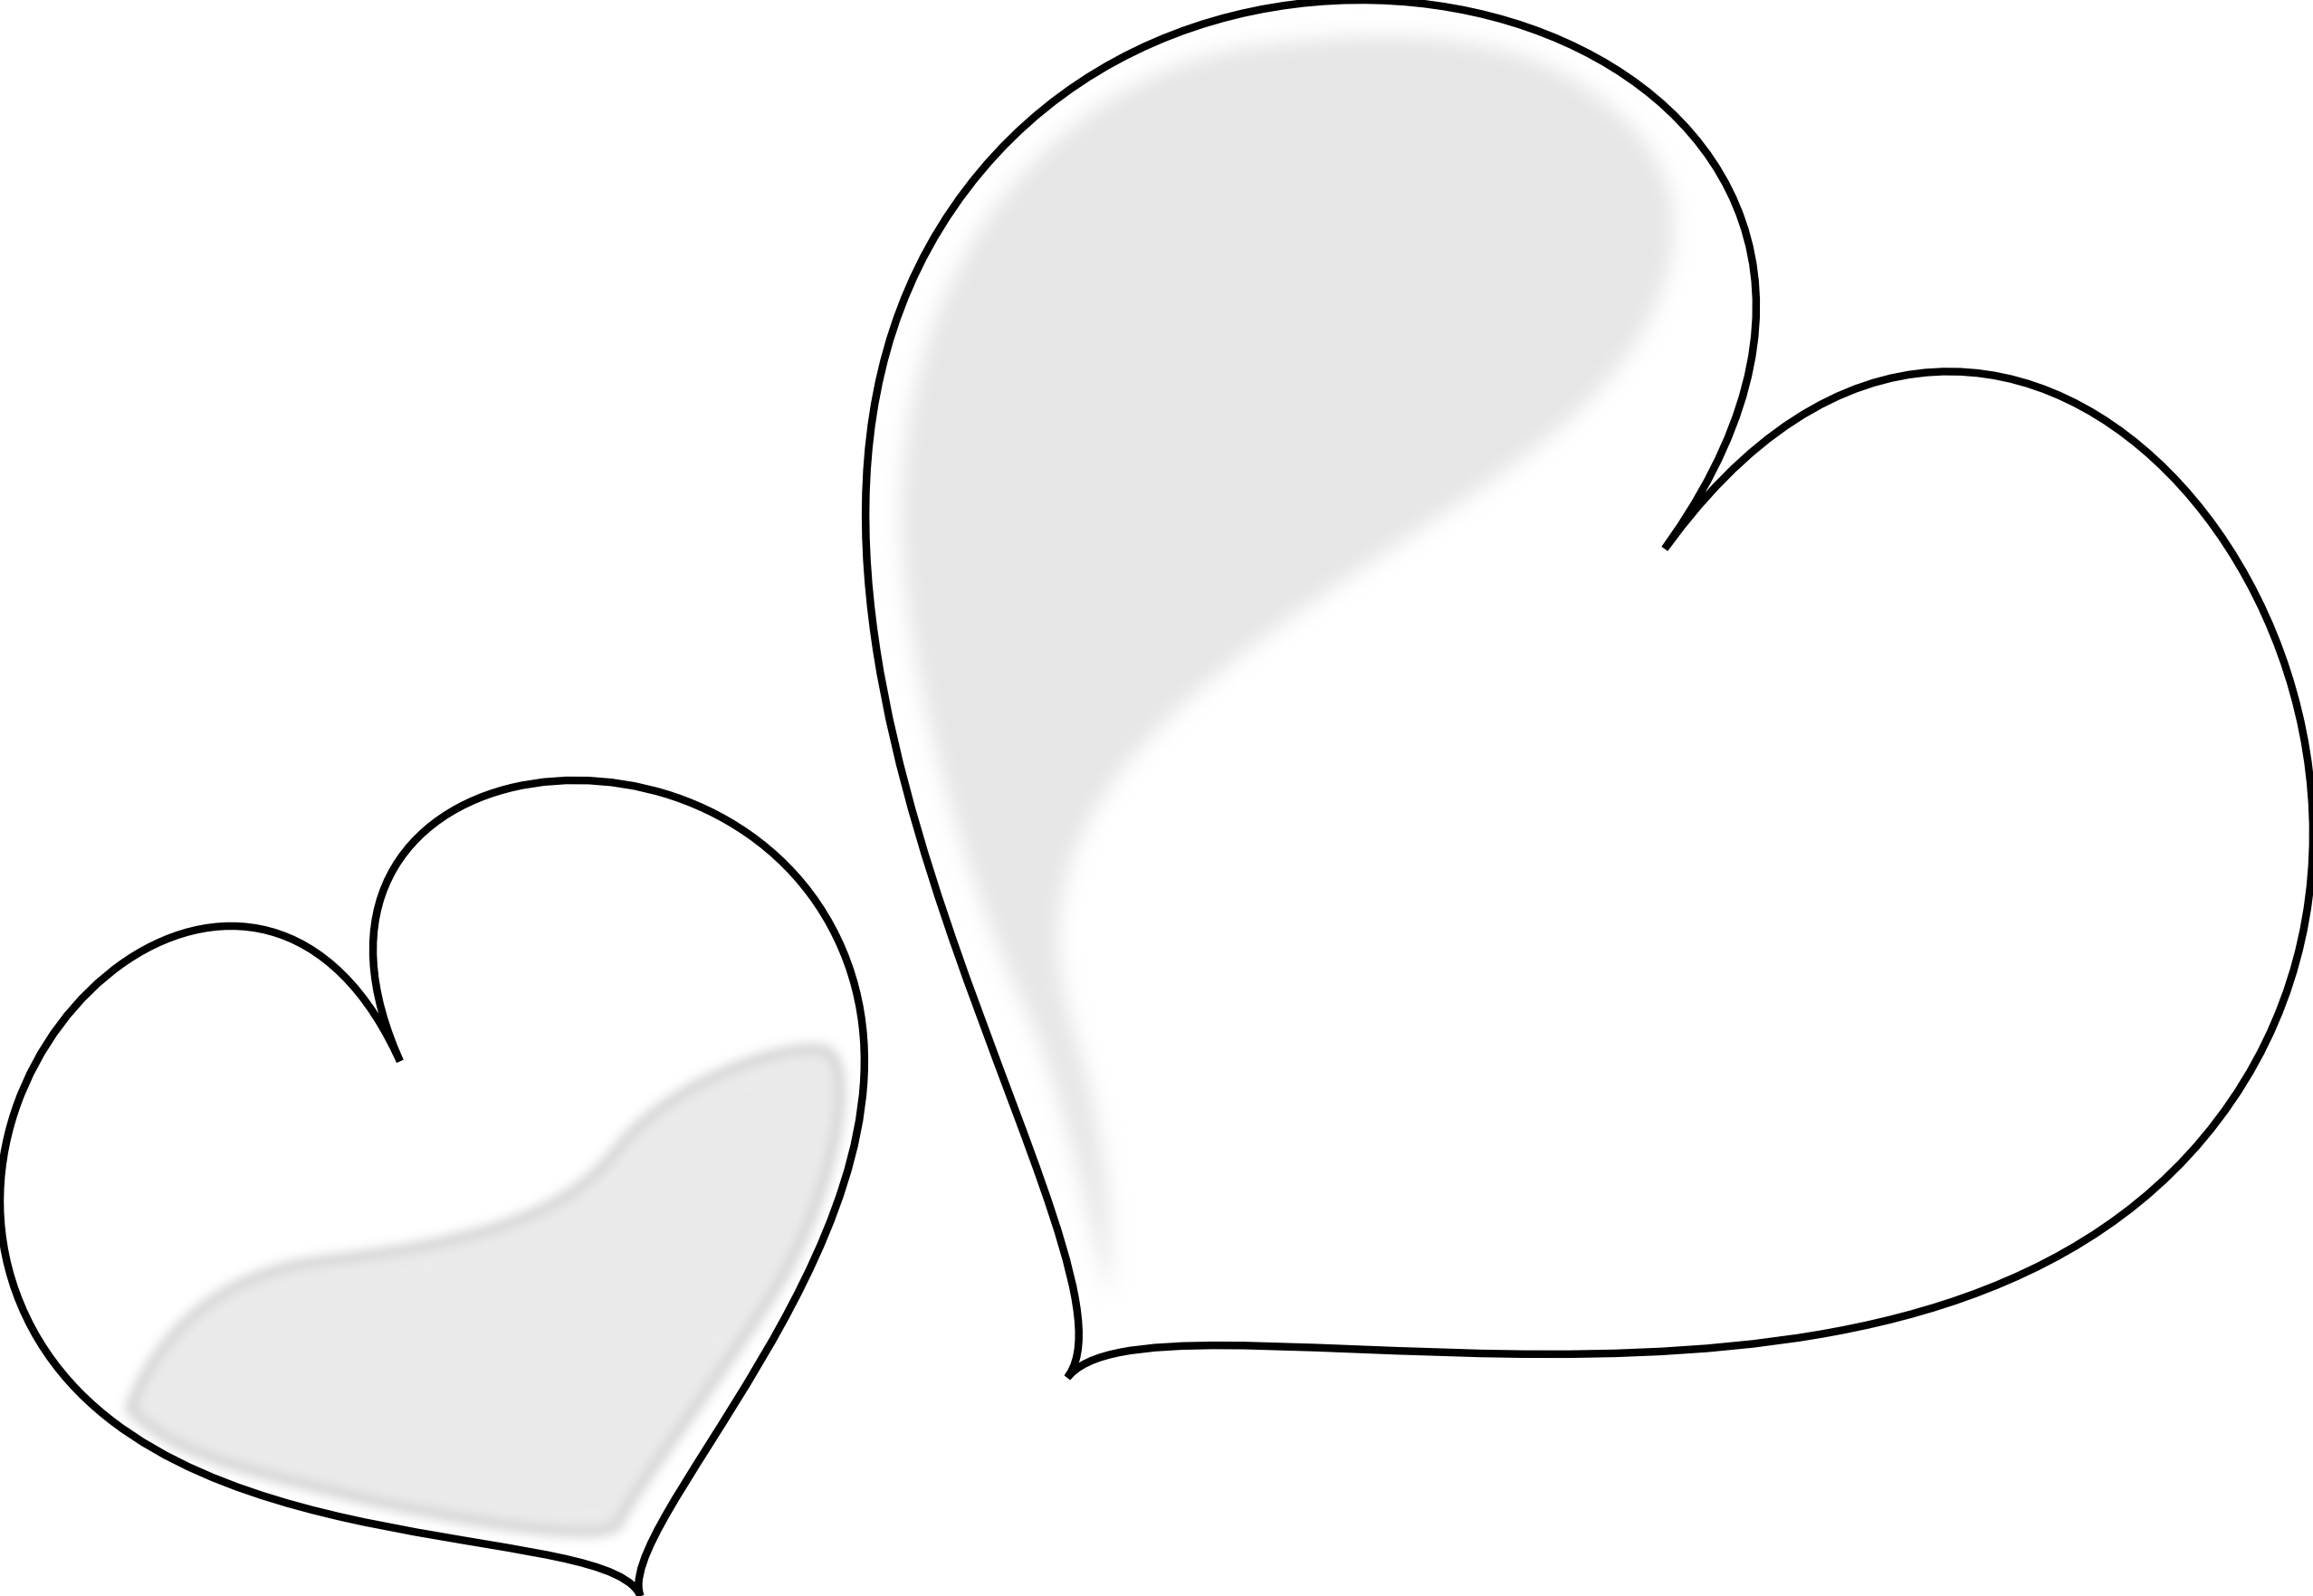 human heart clipart black and white - photo #41